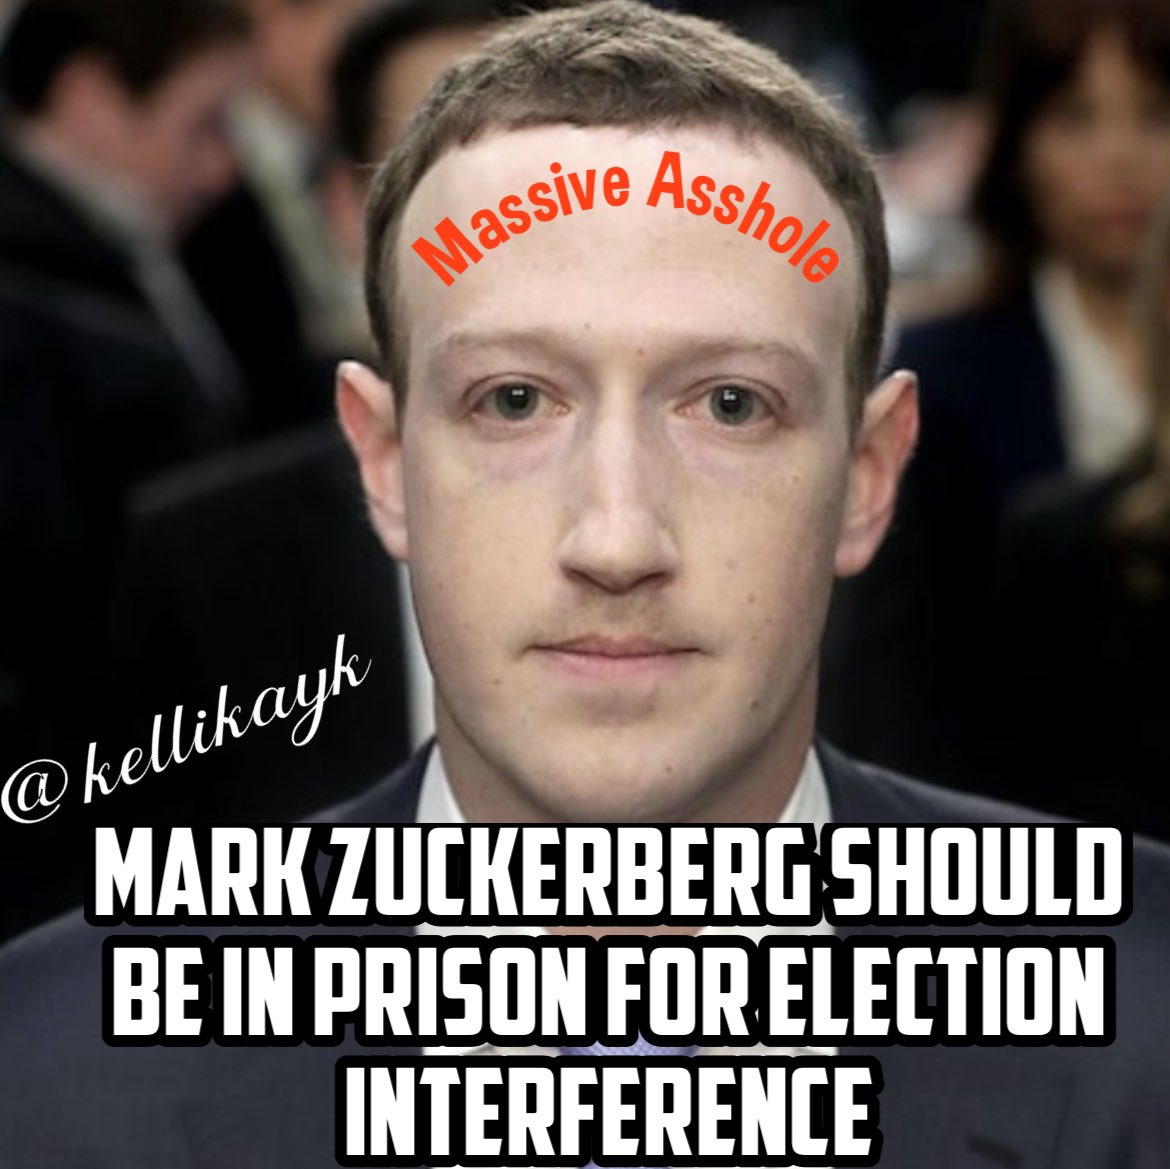 Mark Zuckerberg manipulated Facebook to interfere in the 2020 election. 

Who thinks ZuckerFuck is a massive asshole and should be in prison? 👇